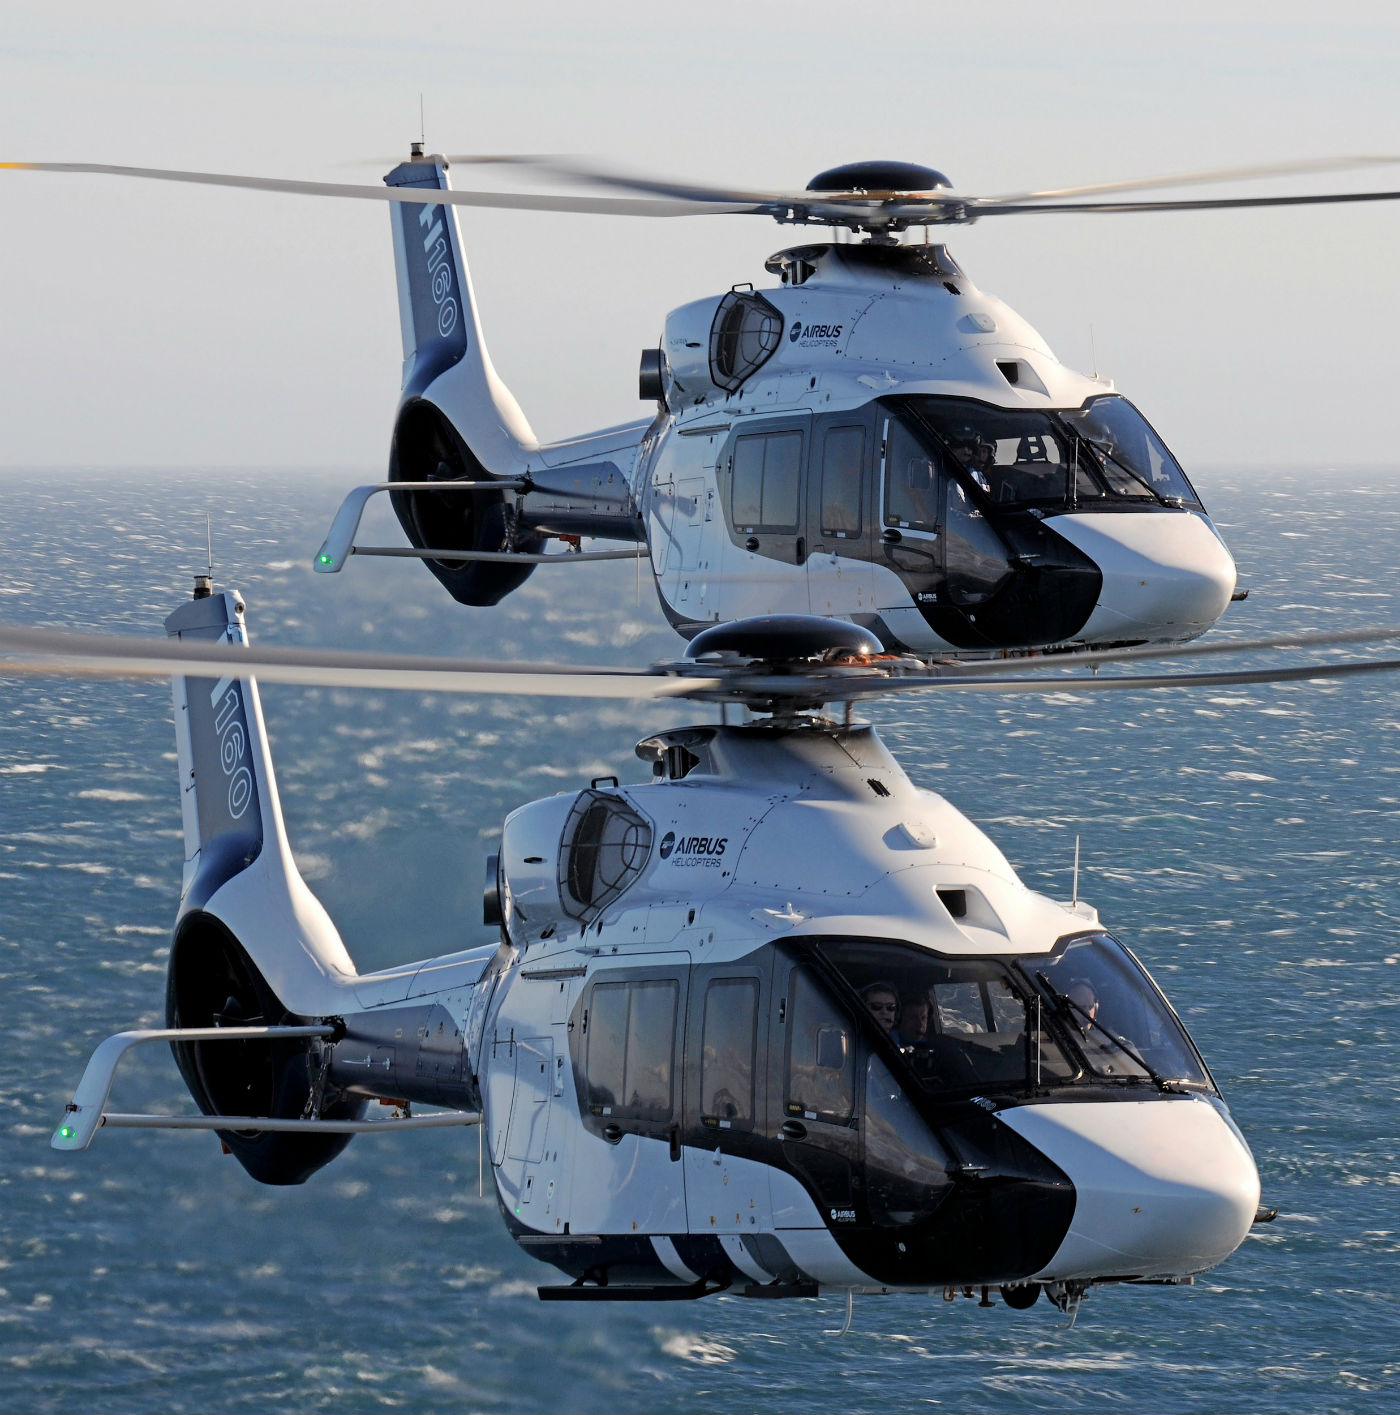 Taking center stage as the largest exhibitor at this regional event, Airbus Helicopters’ showcase will include an impressive life-size static display of its new-generation medium-lift H160, making its maiden appearance in Southeast Asia. Airbus Photo